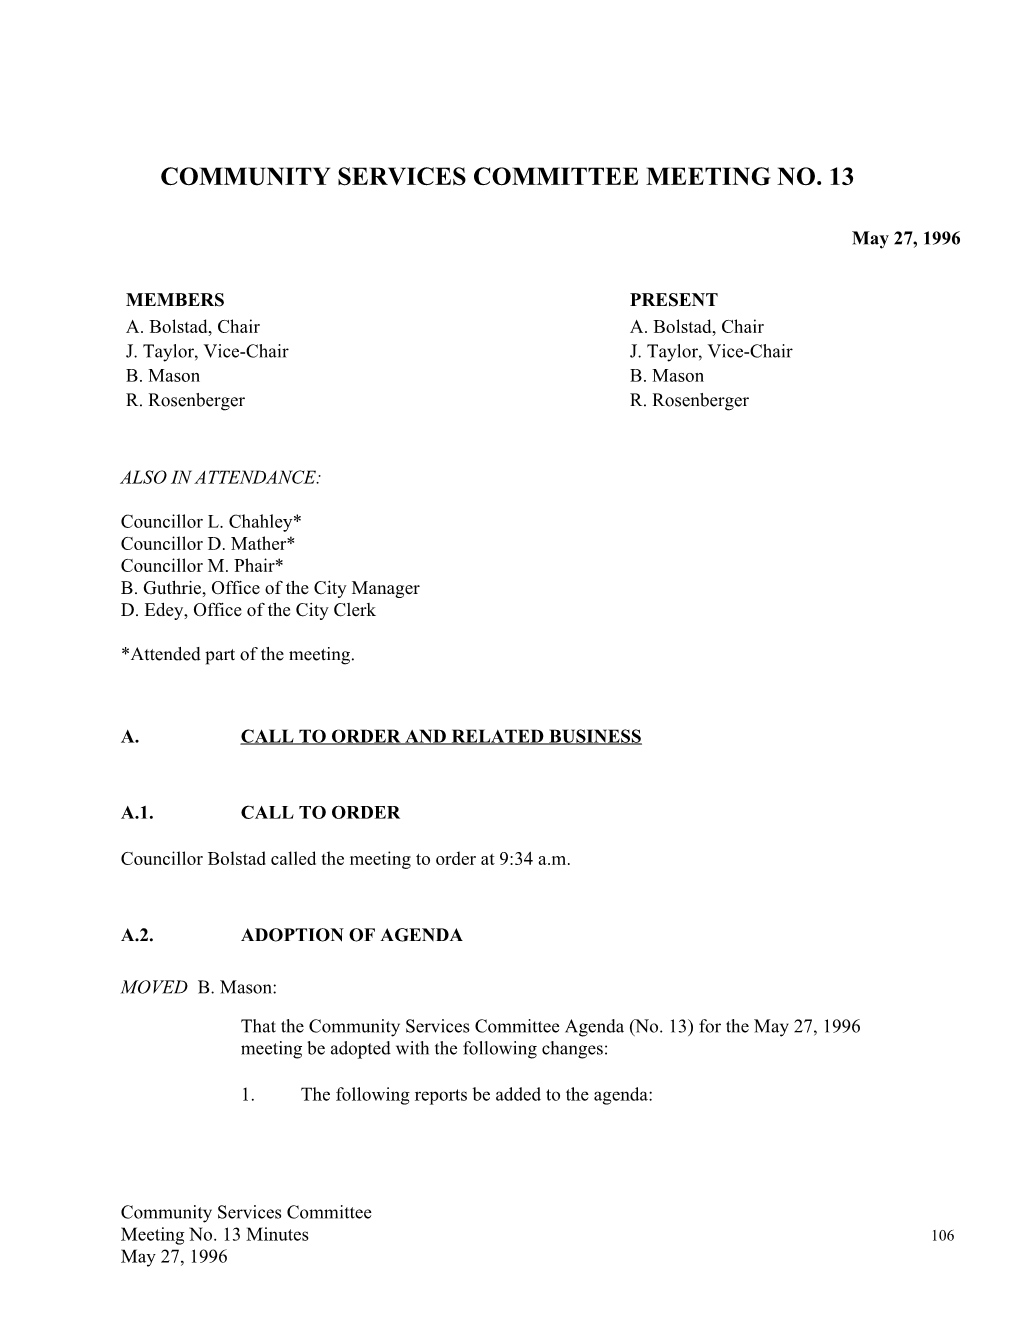 Community Services Committee Meeting No. 13